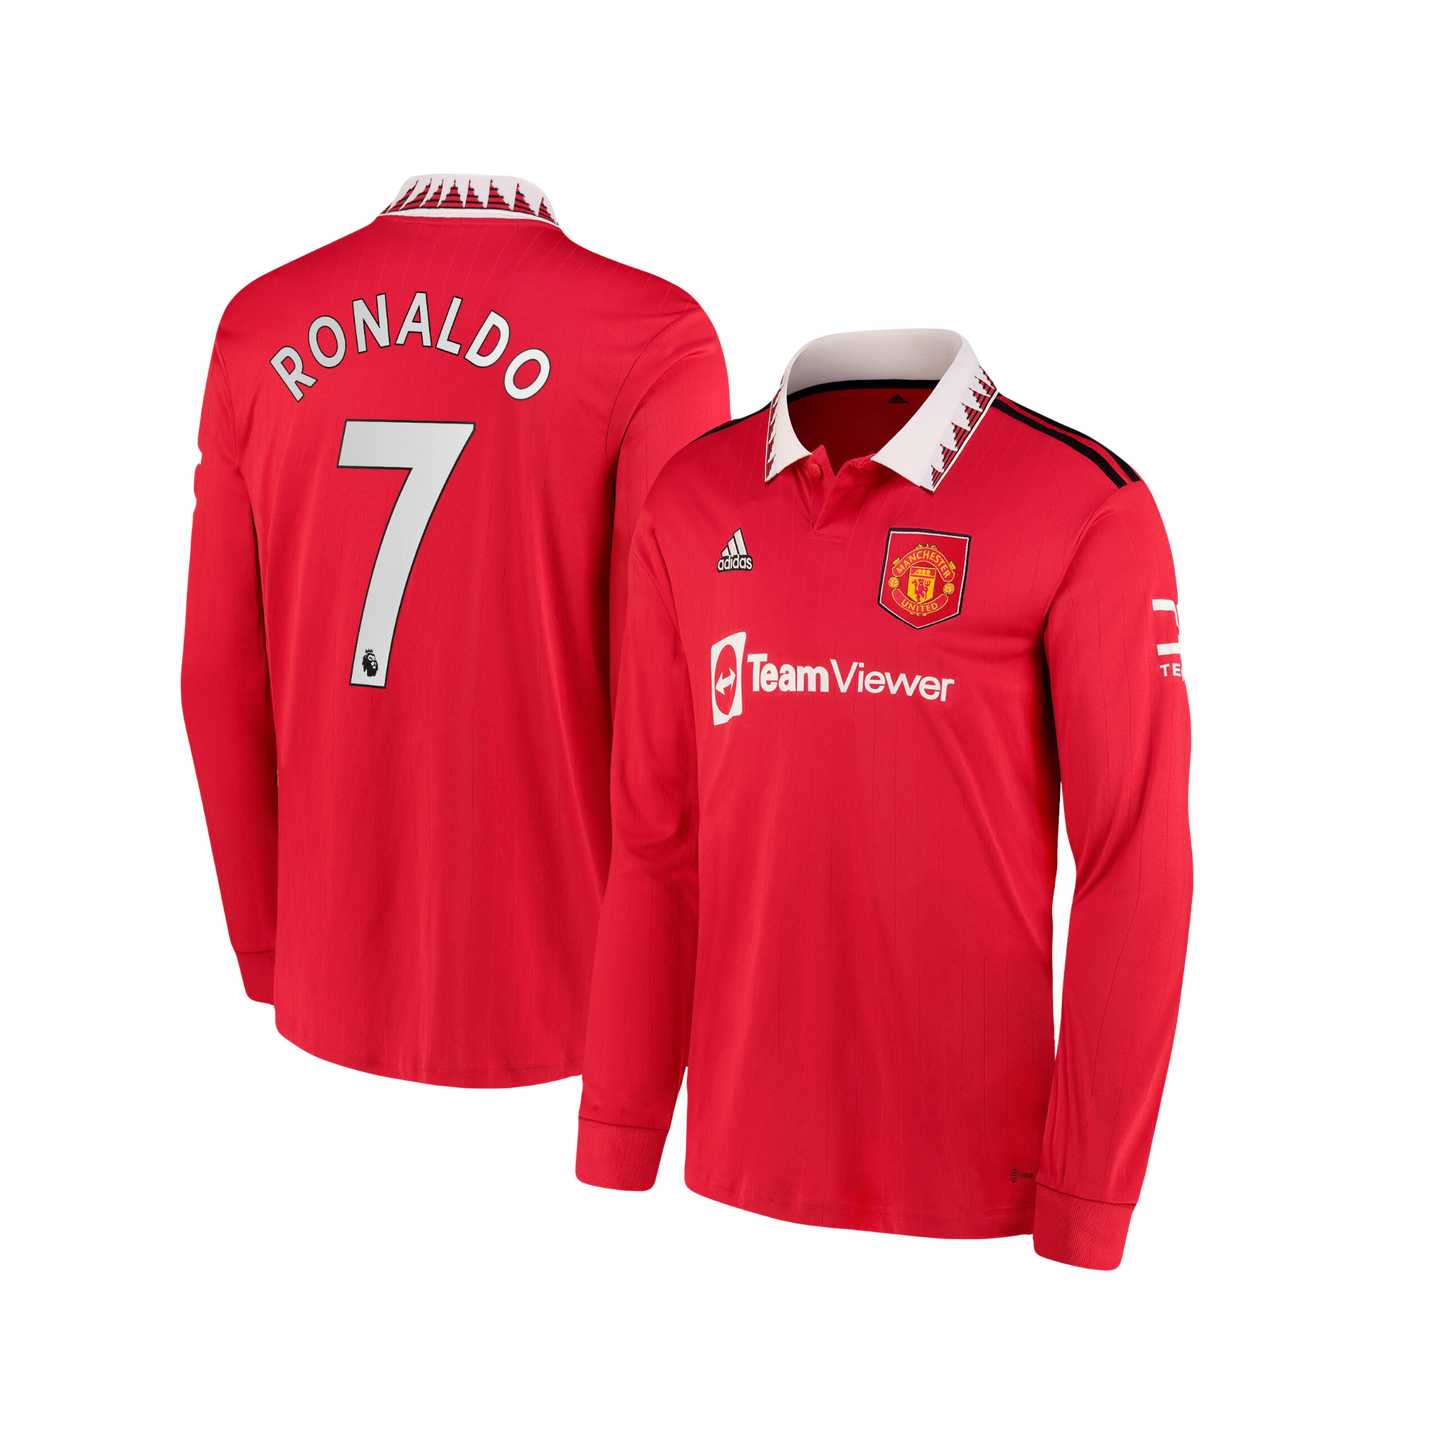 Cristiano Ronaldo Manchester United 2022/23 Season Home Kit Authentic Adidas On-Field Player Version Long Sleeve Jersey - Red